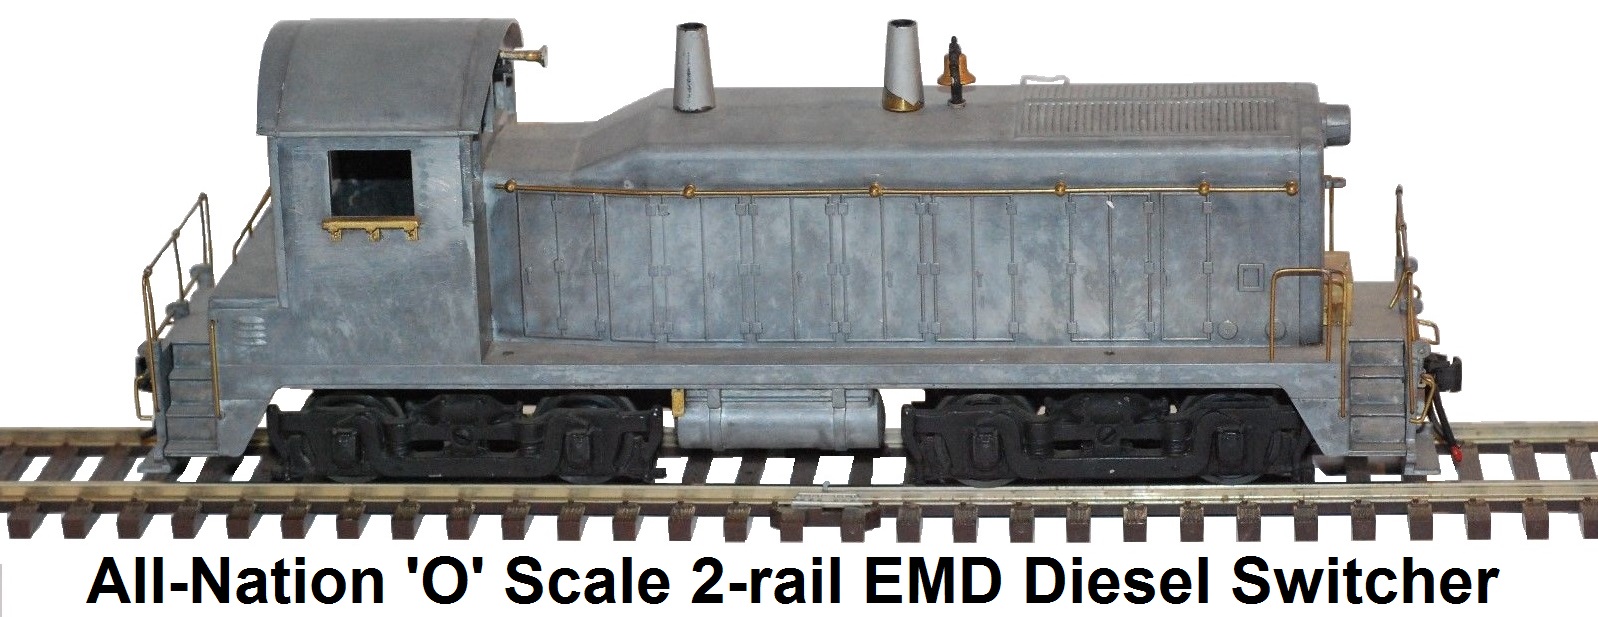 All-Nation 'O' scale EMD 1,000 HP Diesel Yard Switcher for 2-rail